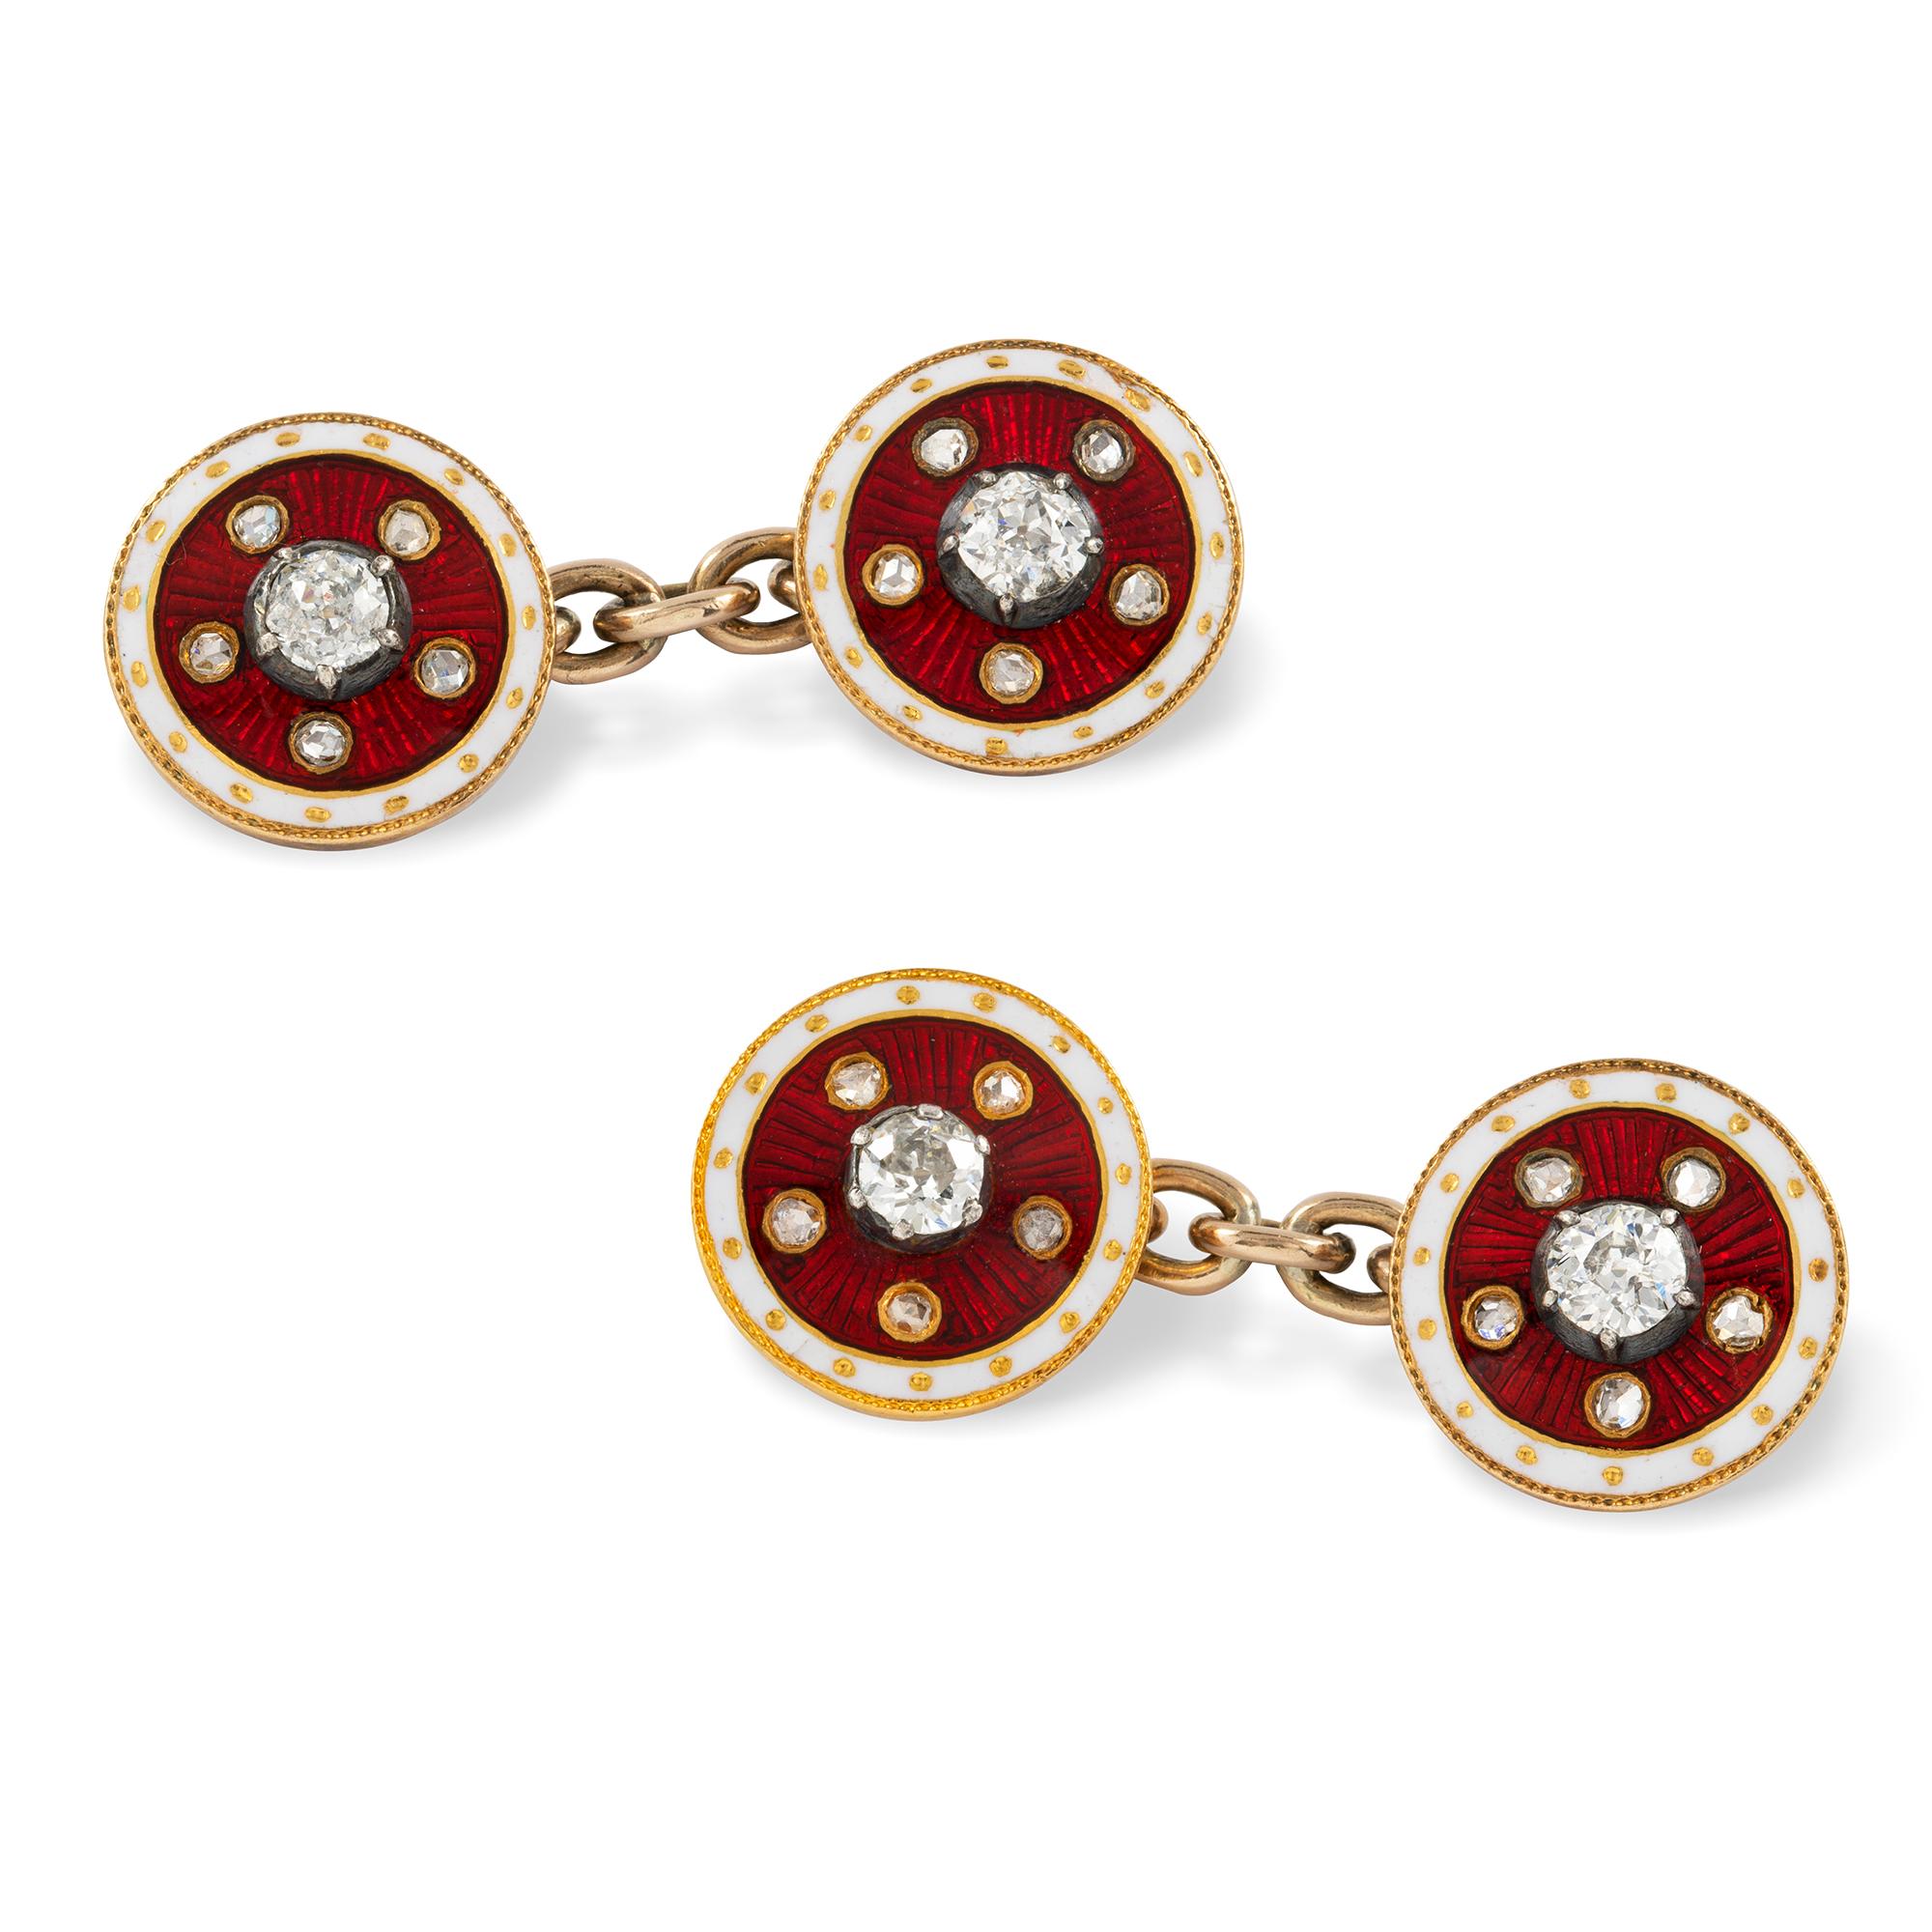 Pair of Victorian Diamond and Red Enamel Cufflinks In Good Condition For Sale In London, GB